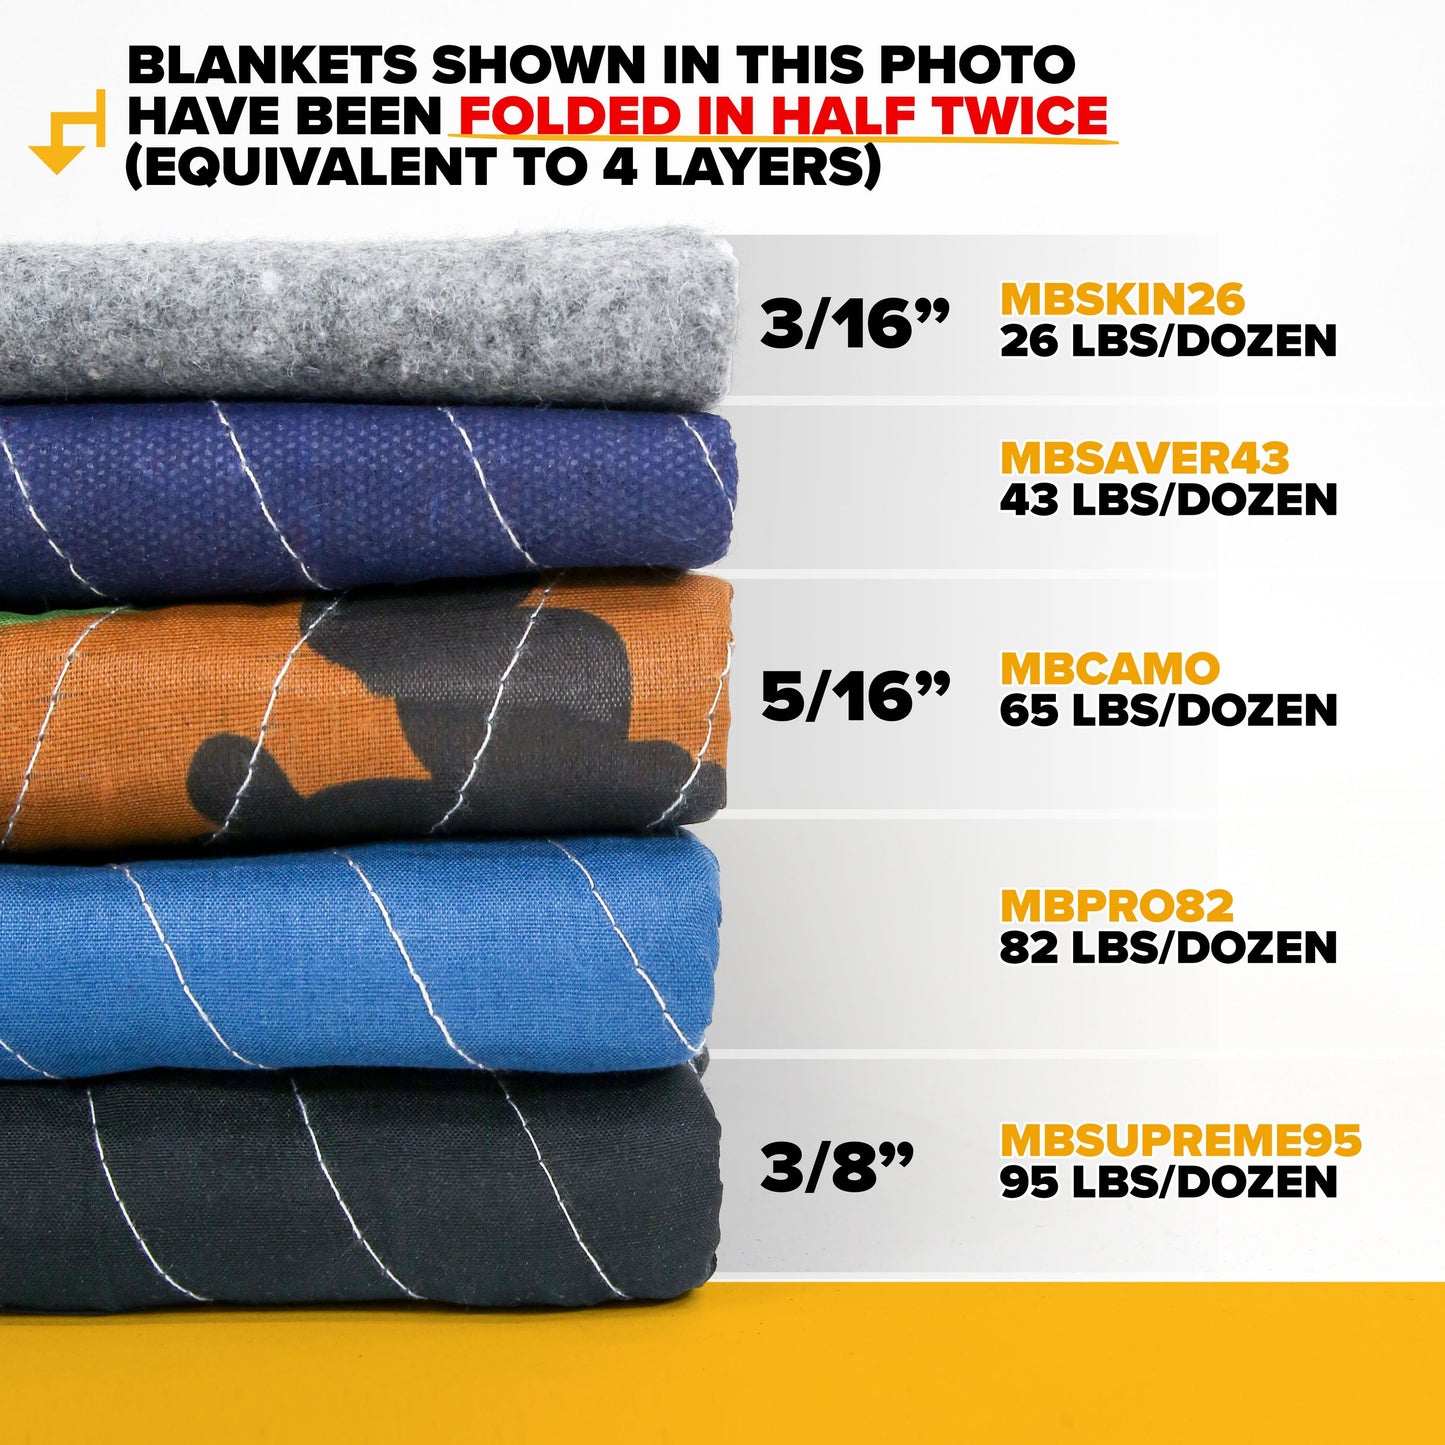 Moving Blankets- Pro Mover 12-Pack, 82 lbs./dozen image 5 of 11